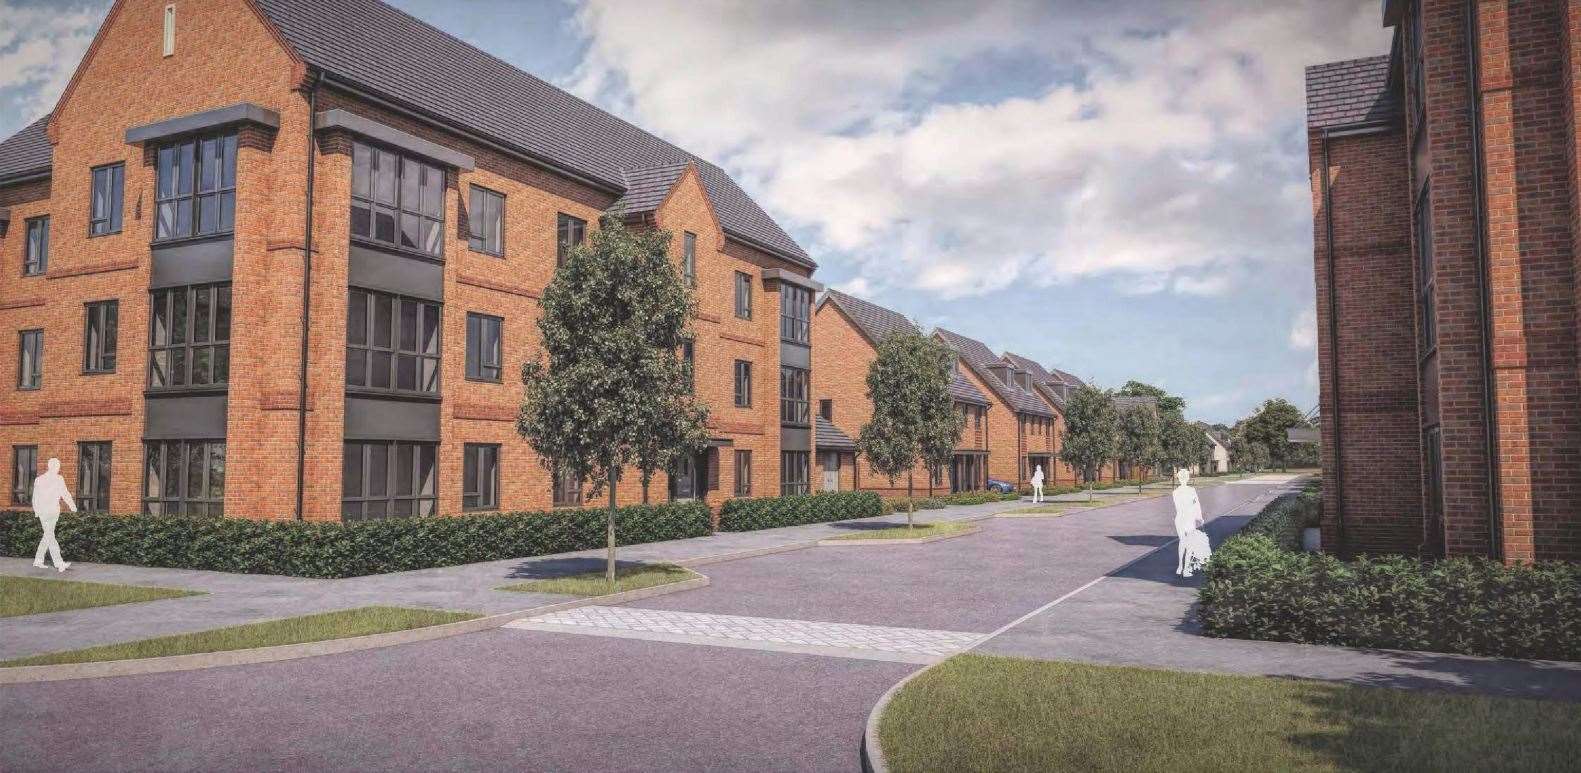 How homes at Napier Barracks could look. Credit: Taylor Wimpey Design Statement (10910791)